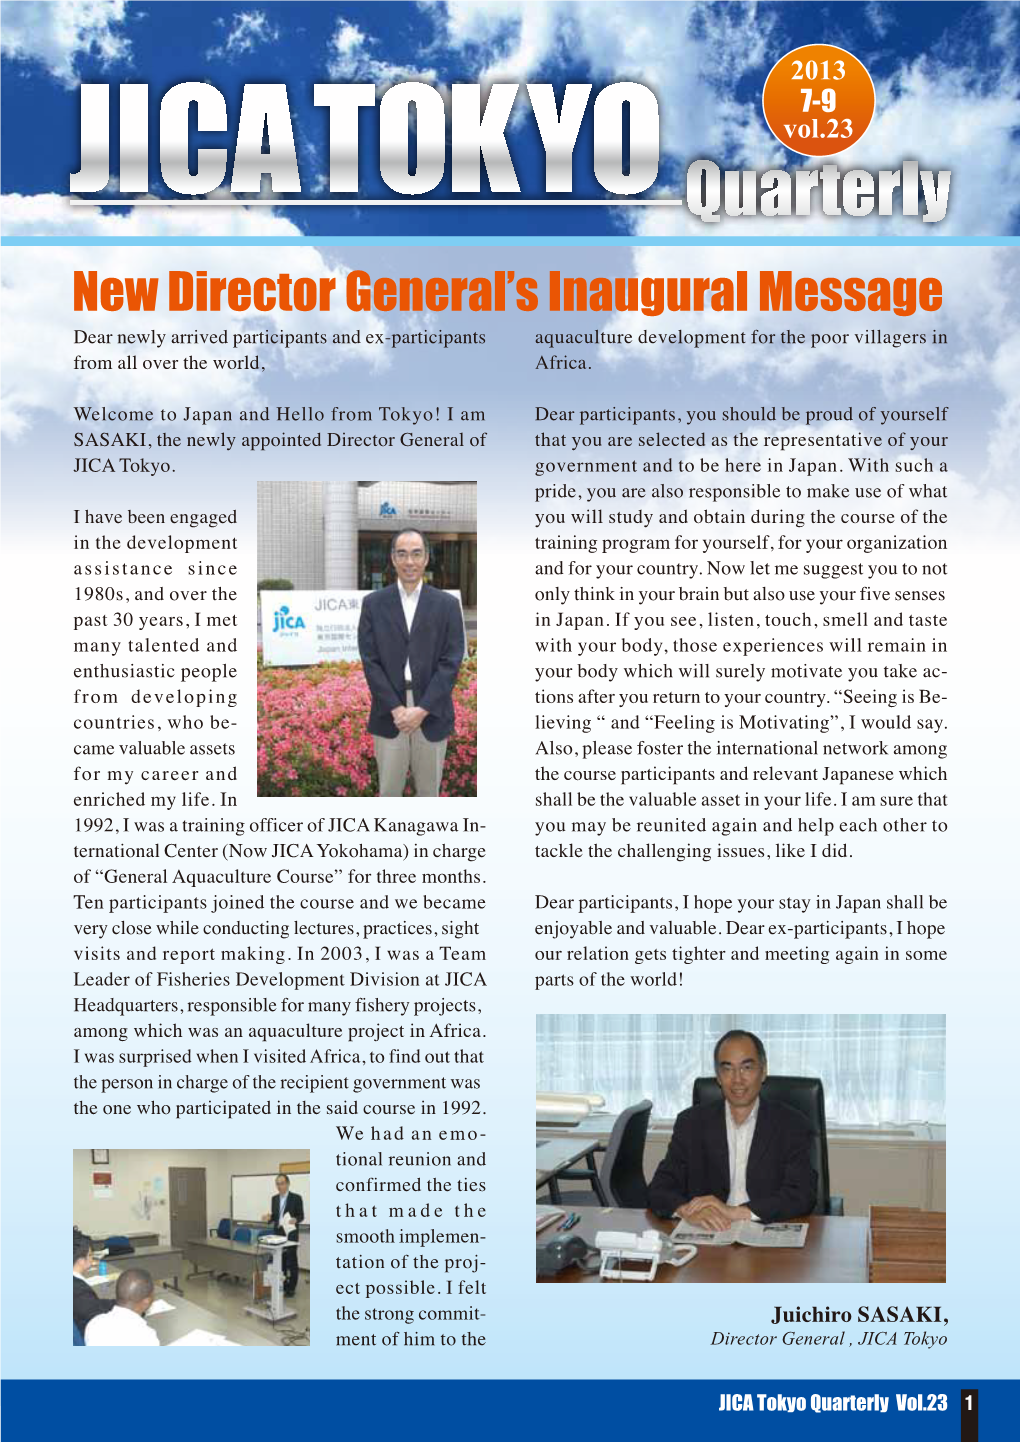 New Director General's Inaugural Message